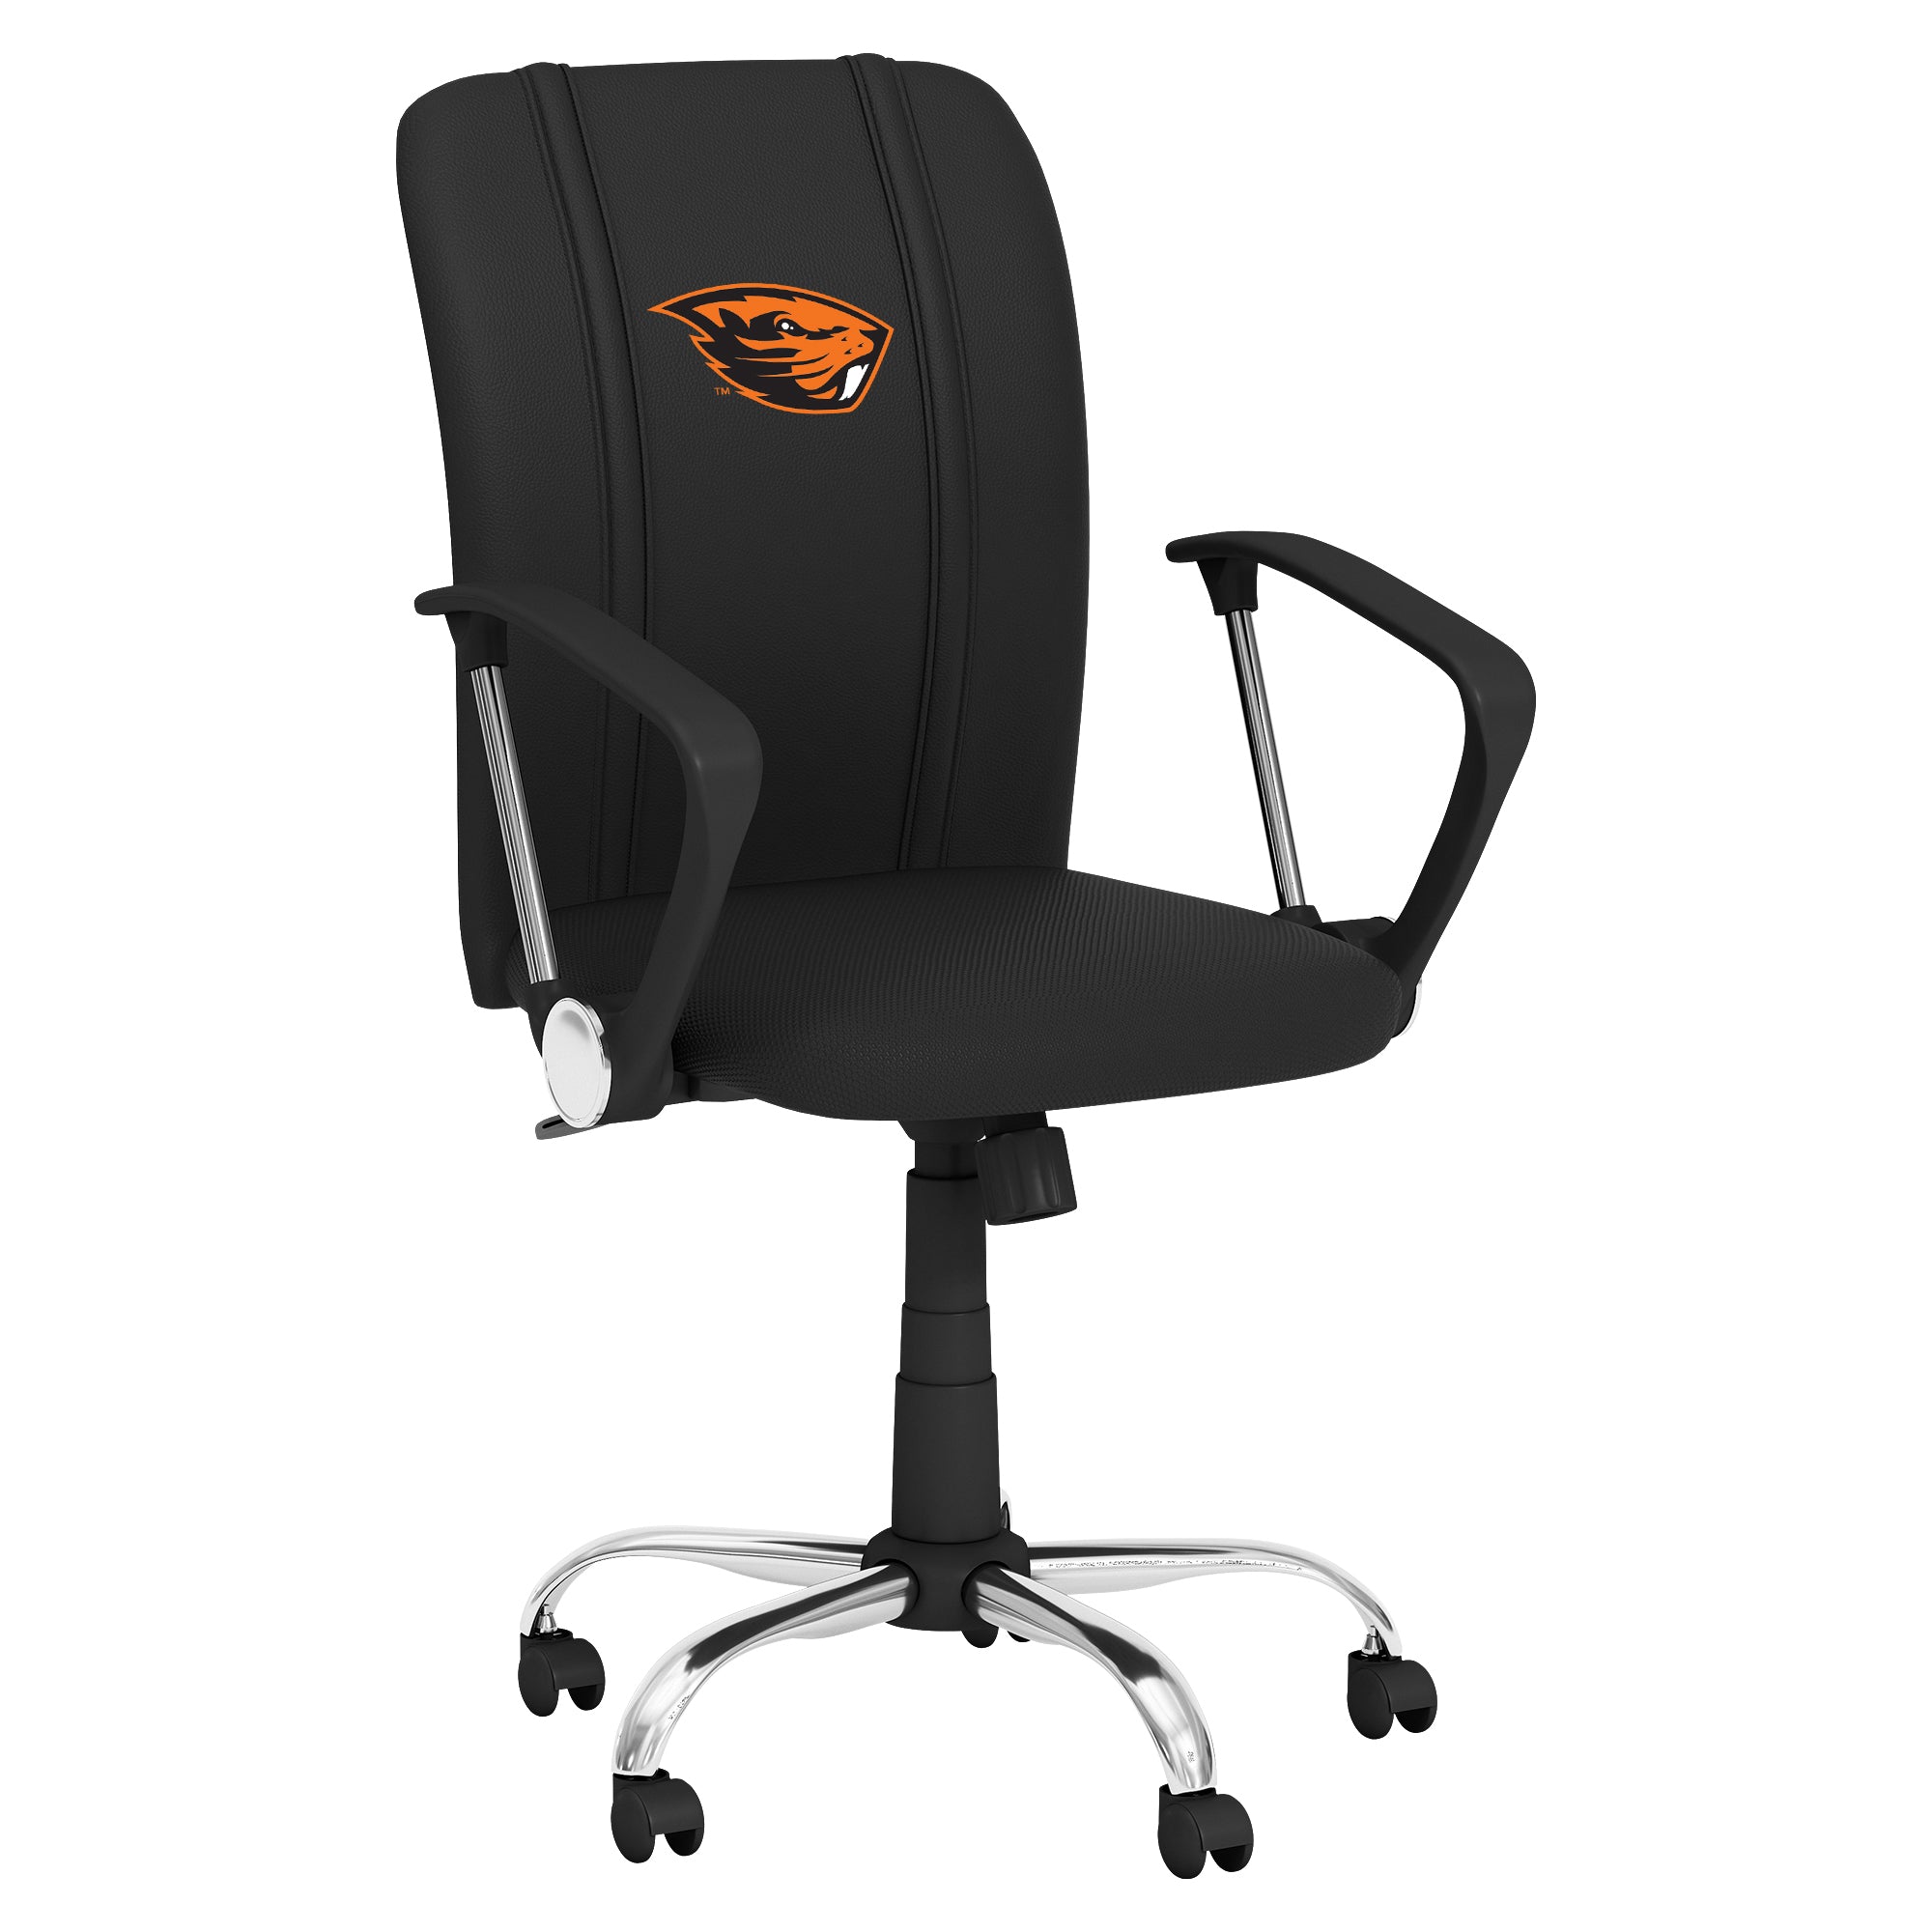 Oregon State Curve Task Chair with Oregon State University Beavers Logo